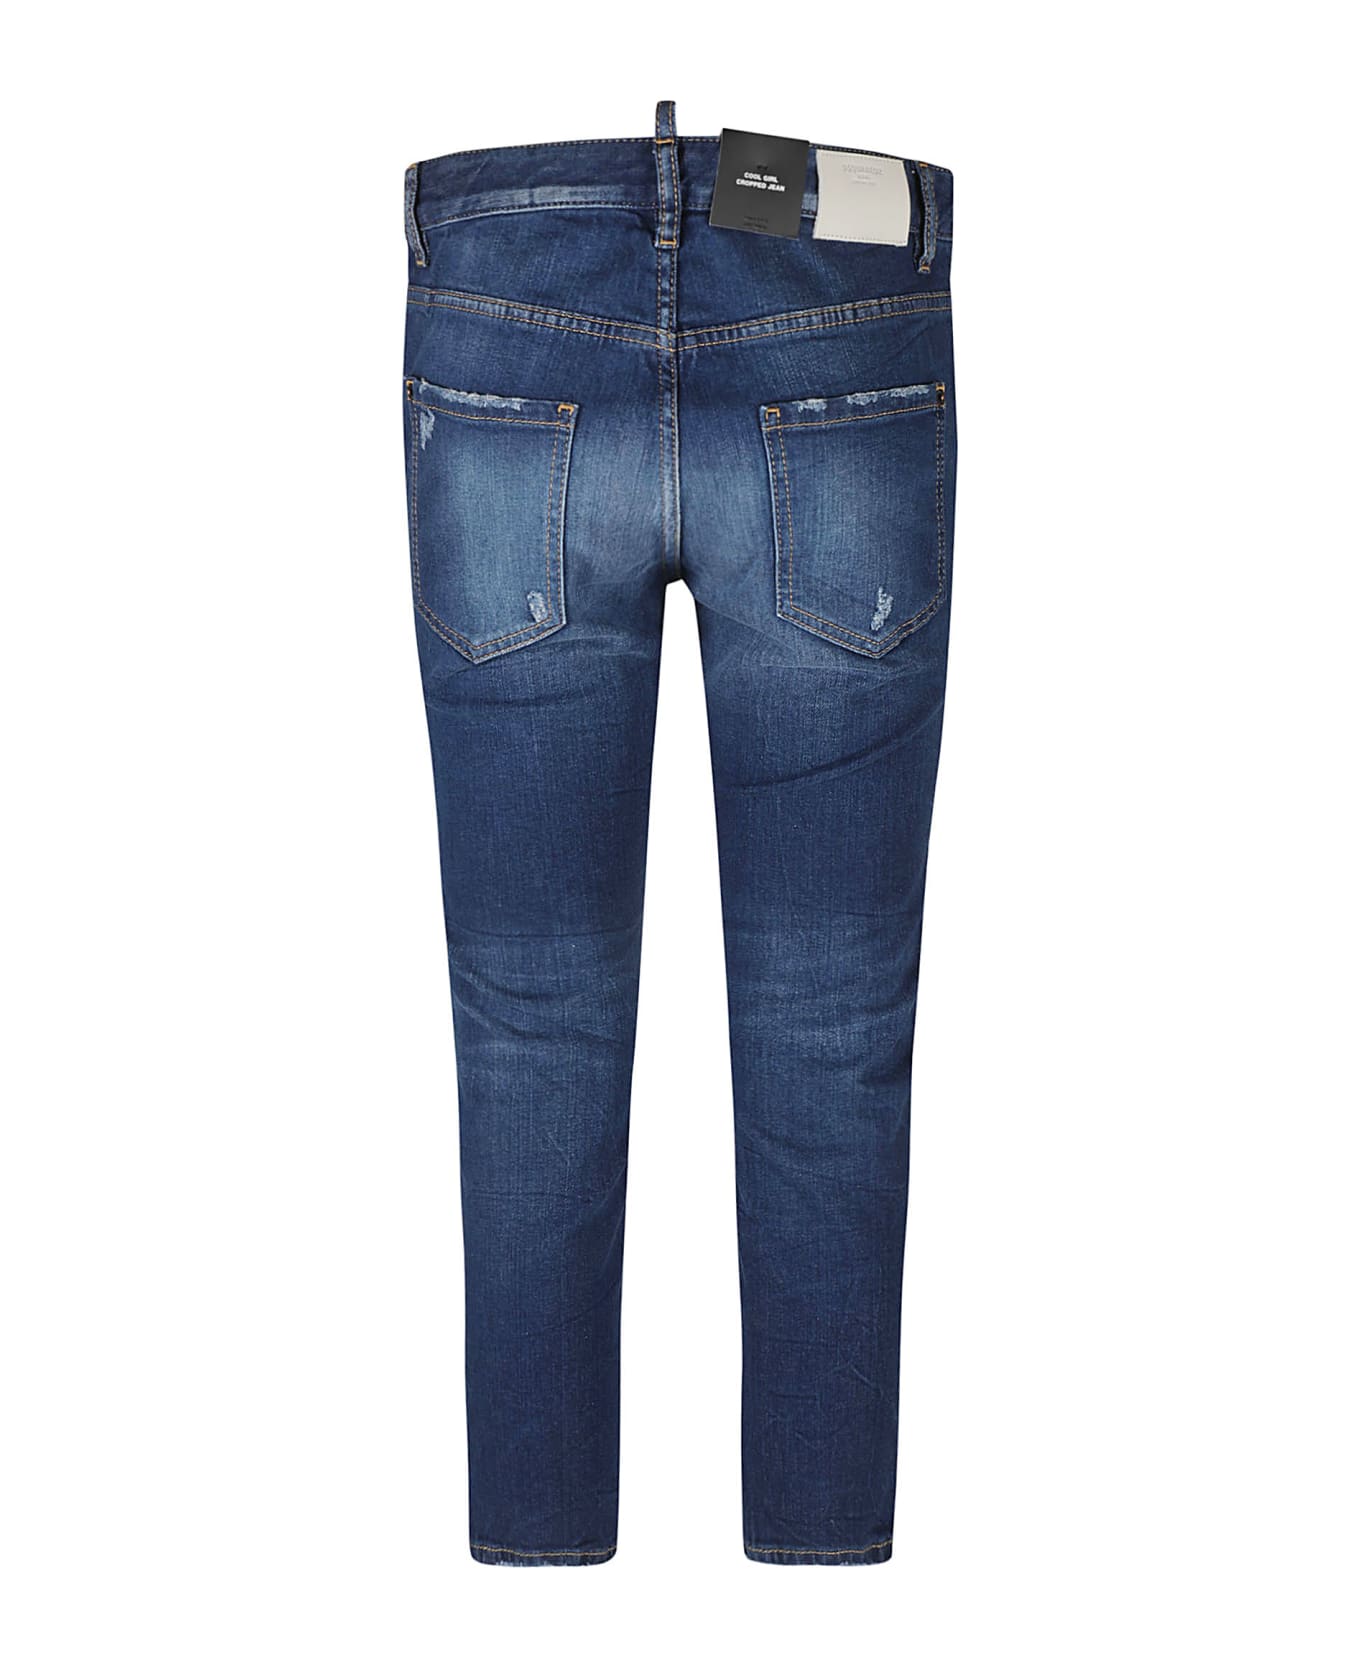 Dsquared2 Cool Girl Cropped Jeans - Navy Blue